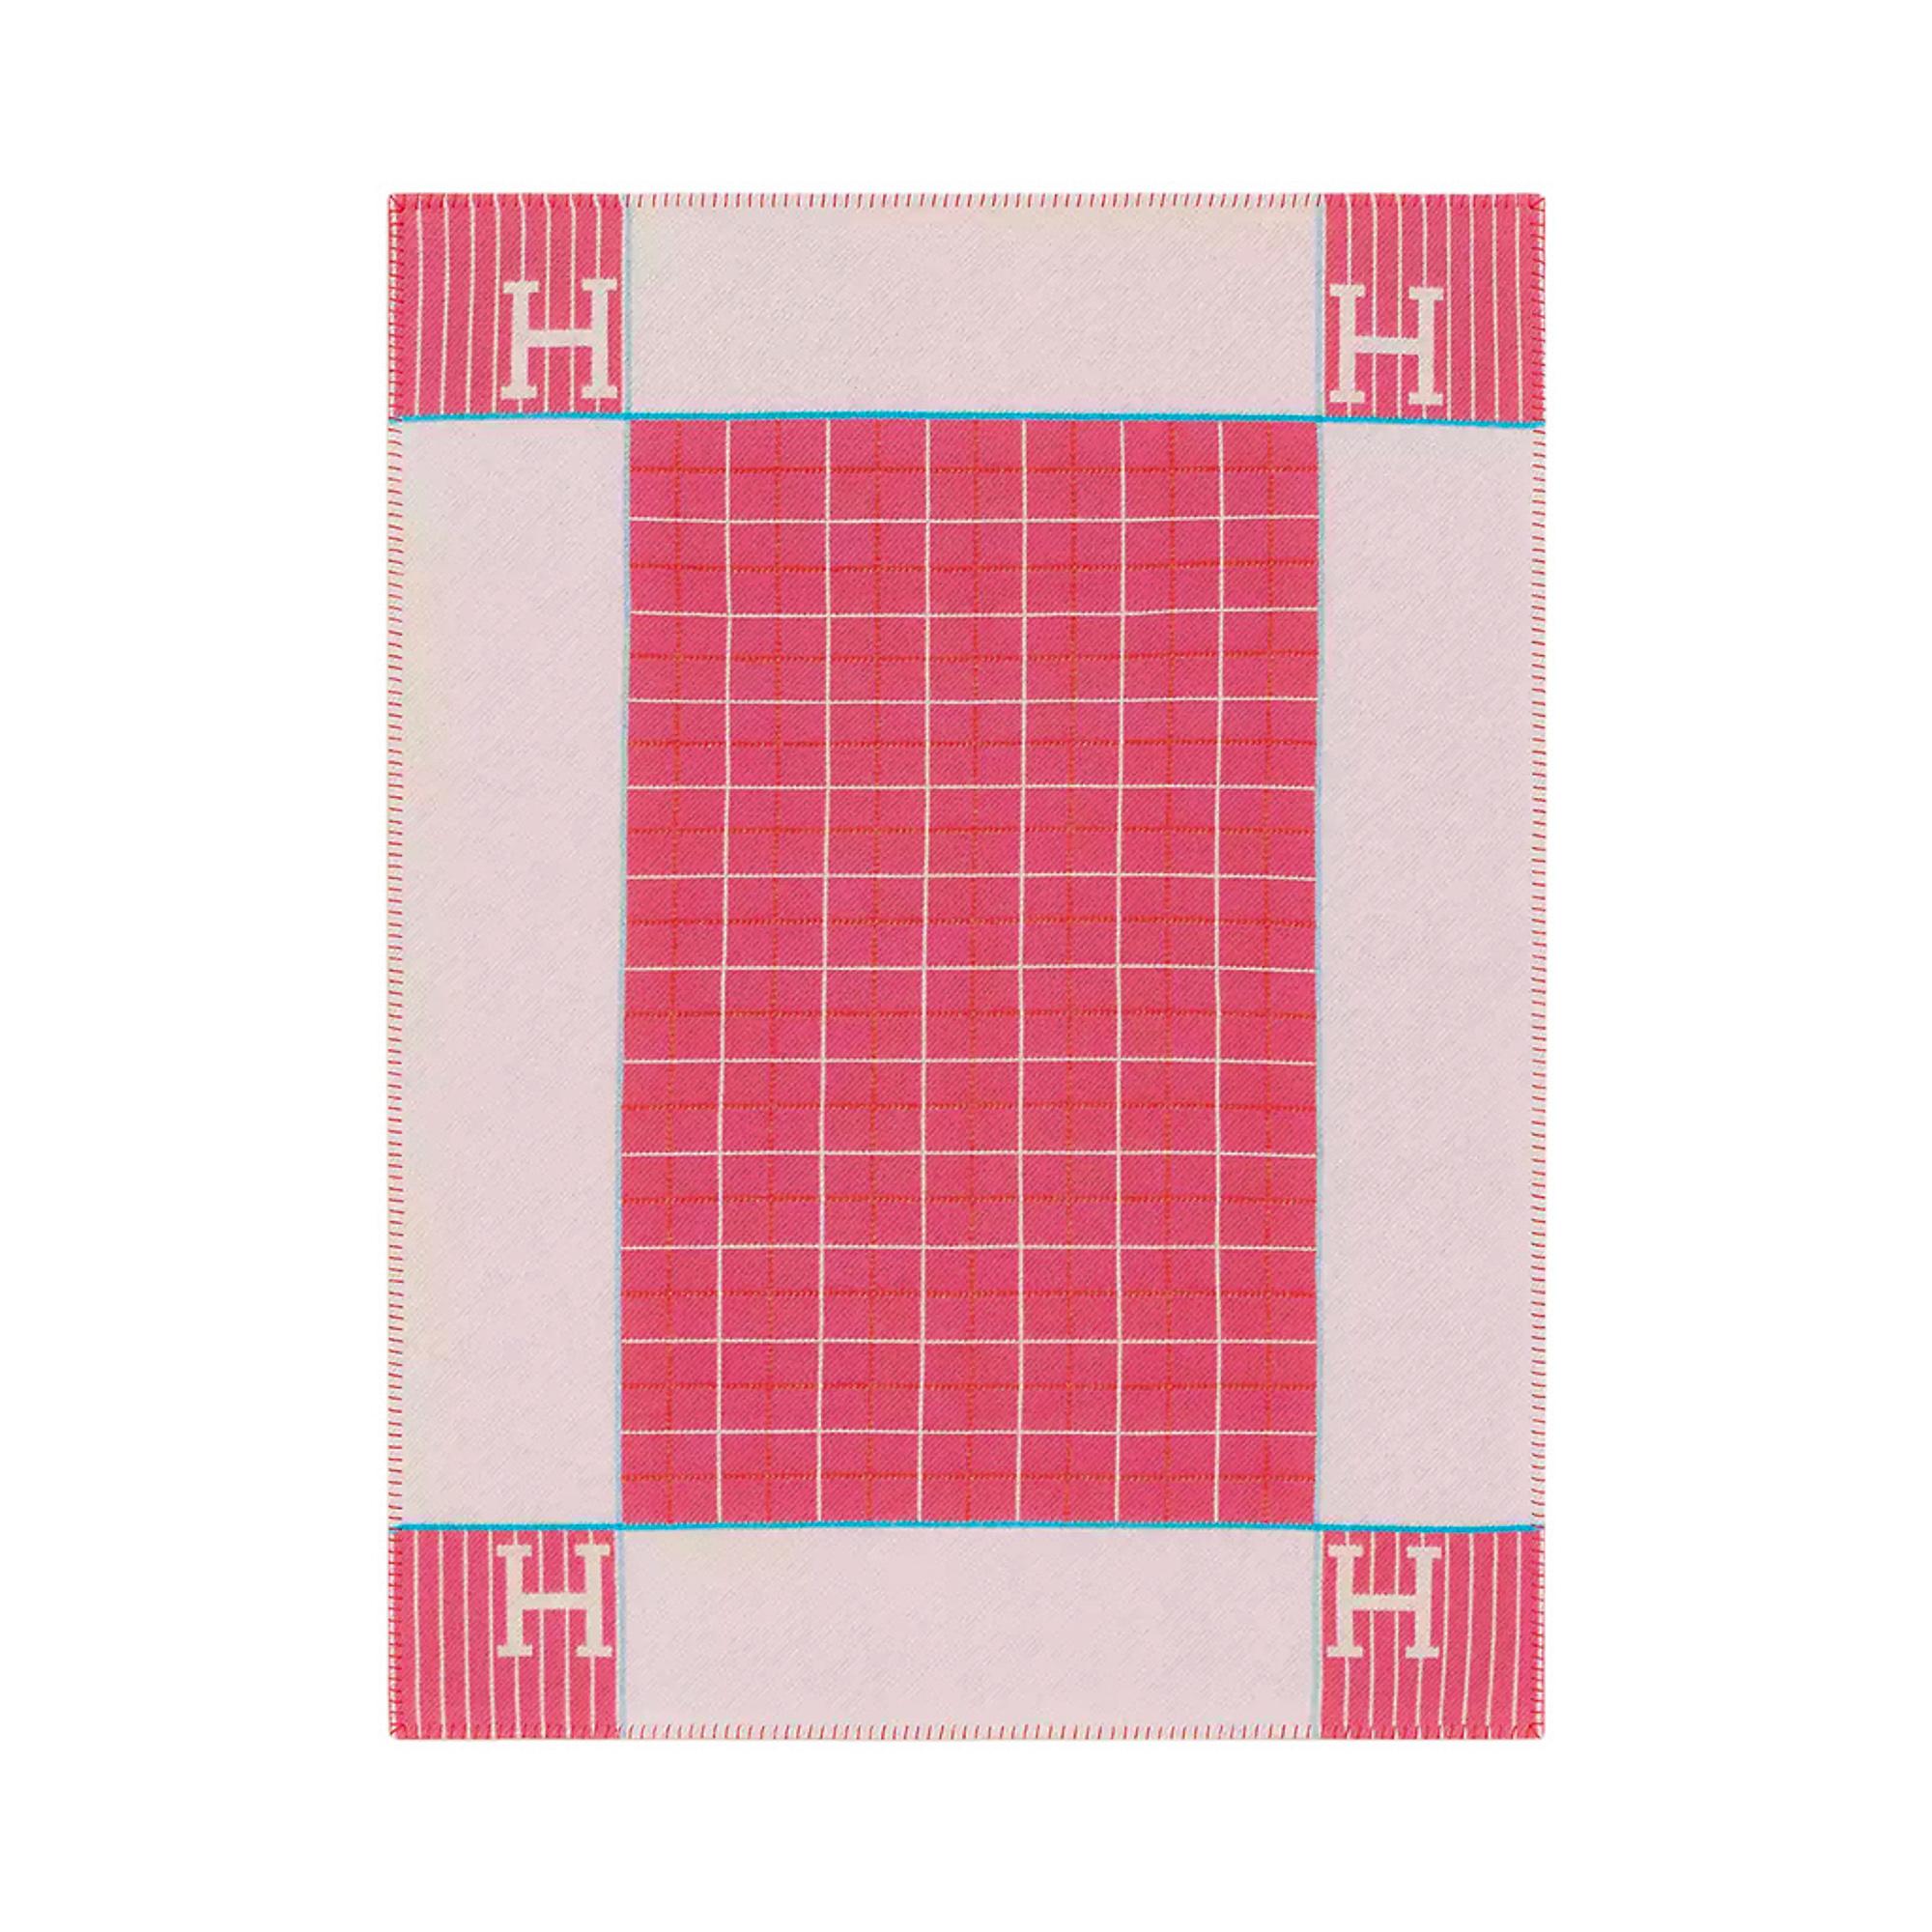 Mightychic offers an Hermes Passe-Passe Baby blanket featured in Pink, Orange and Blue.
Created from 90% Merino Wool and 10% cashmere and has whip stitch edges.
From babies to puppies this fabulous blanket will compliment any decor.
Marvelous